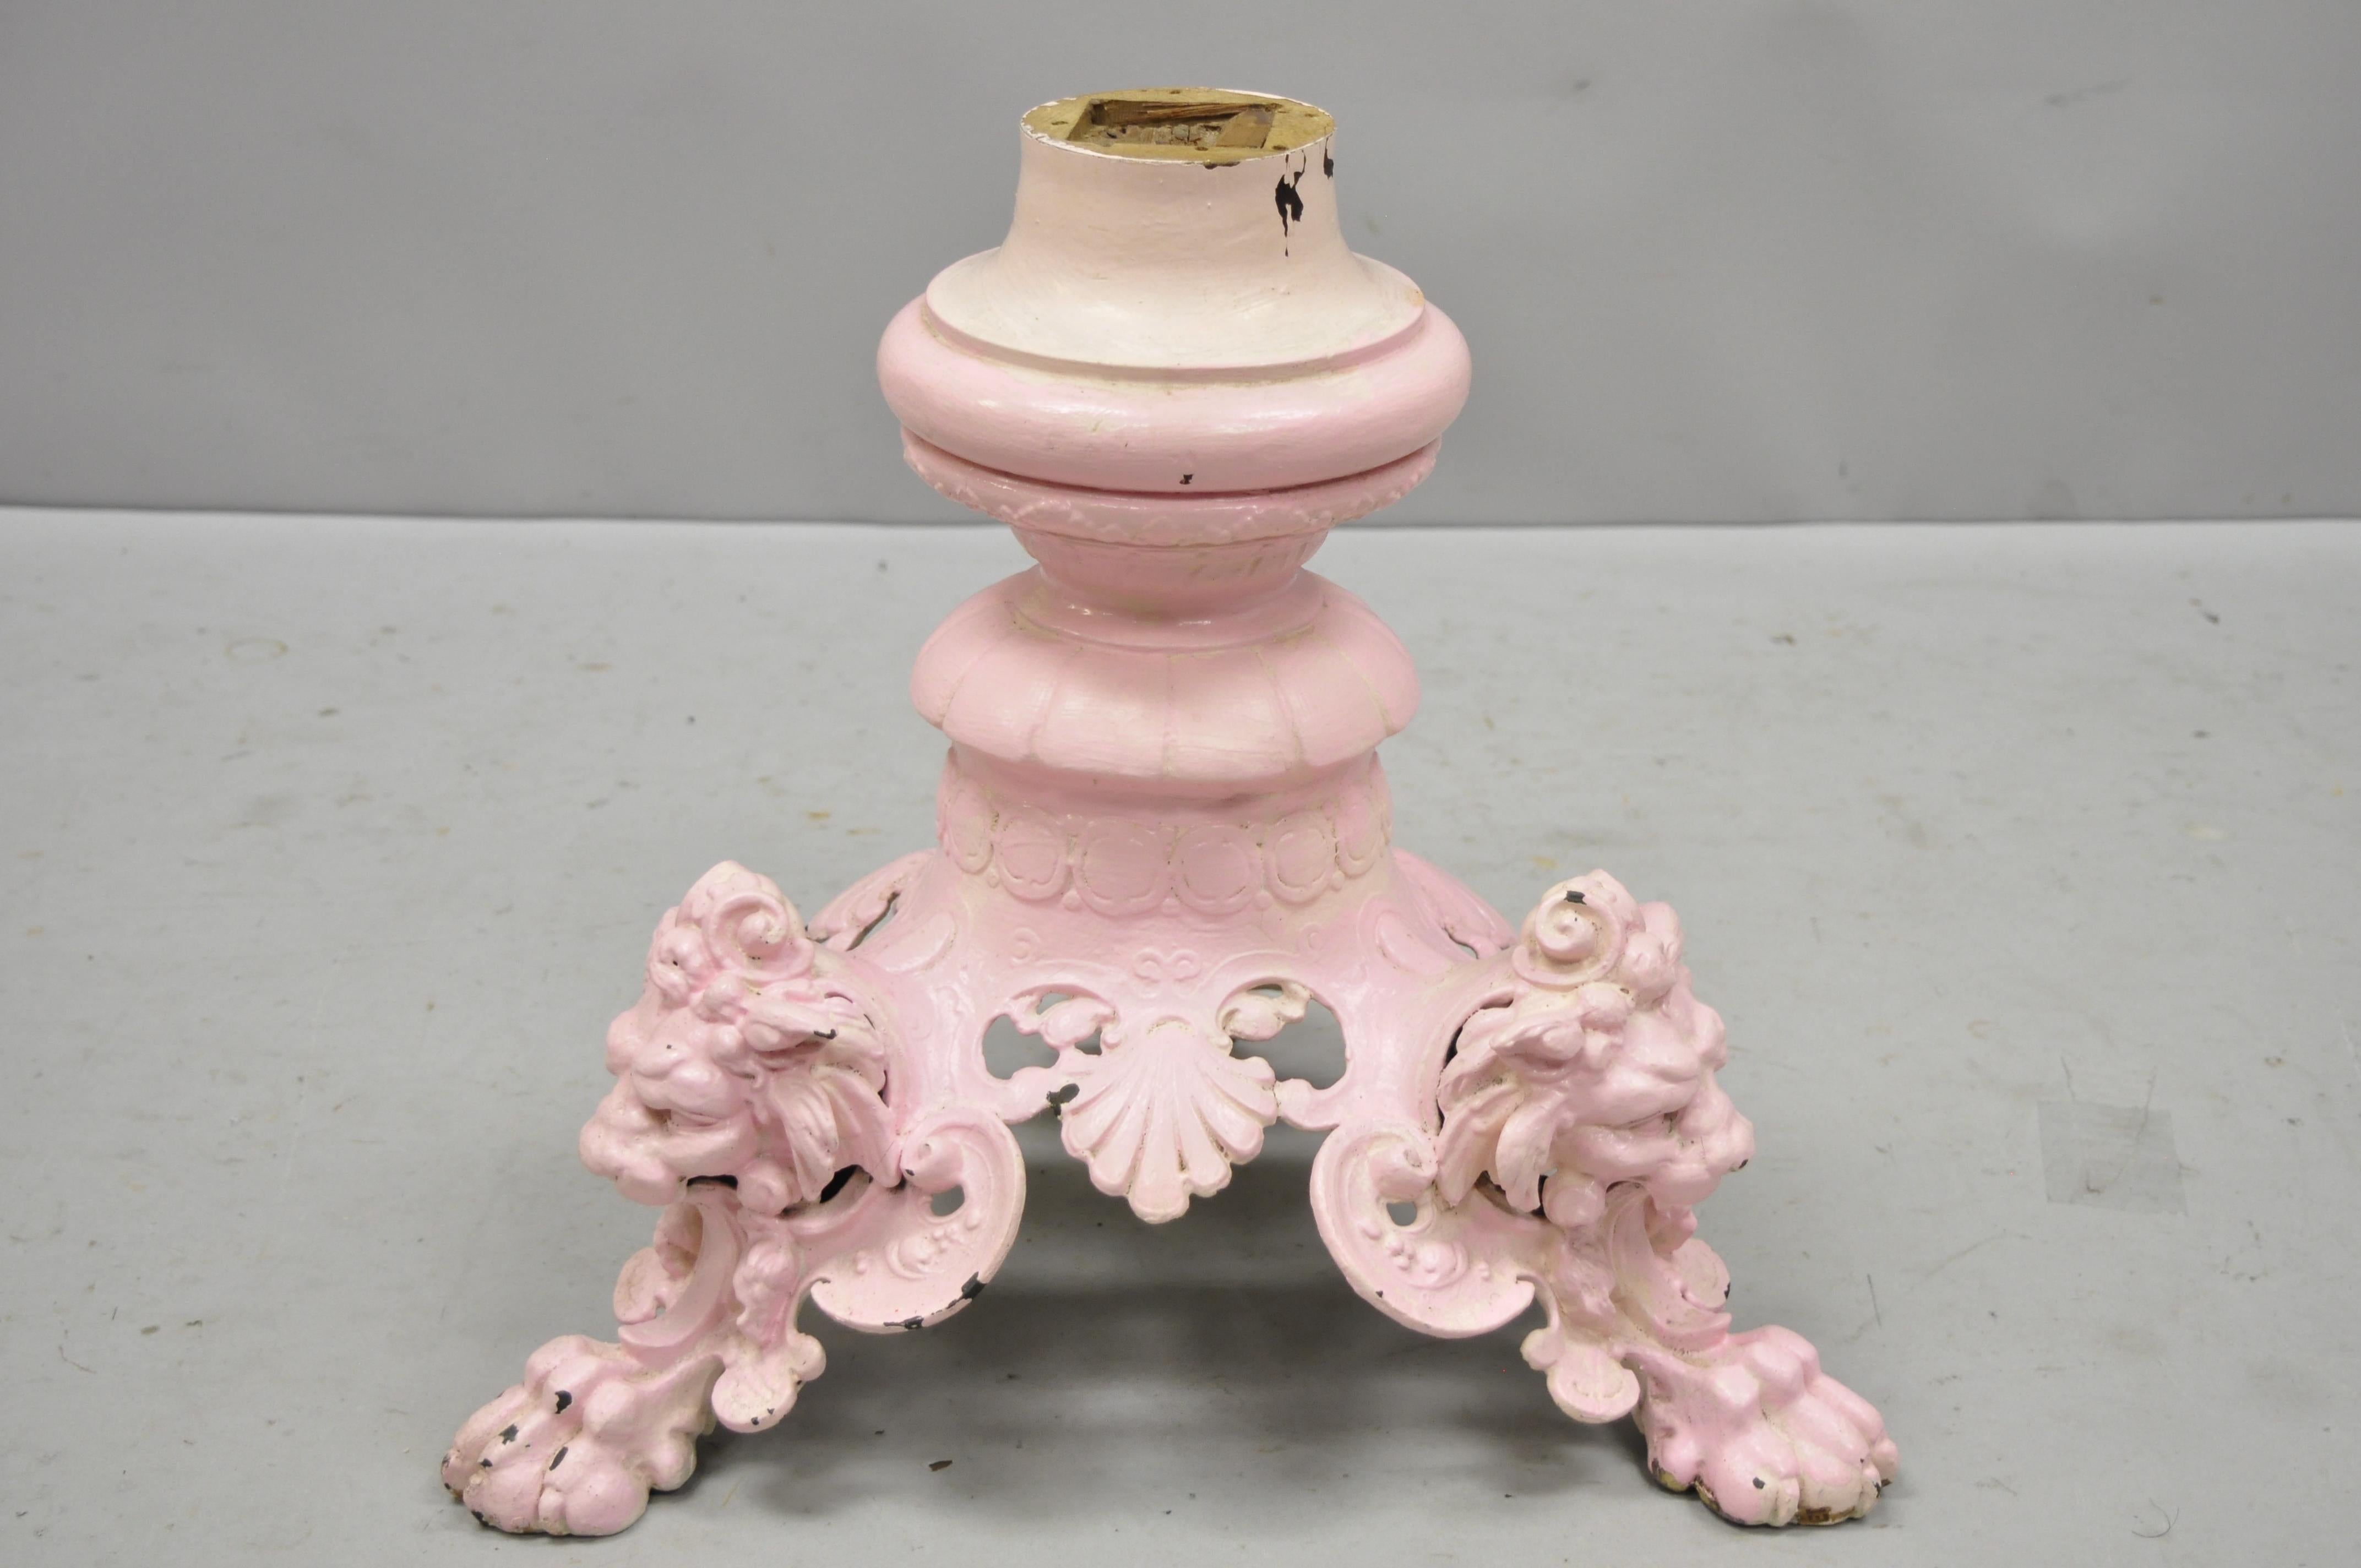 Antique French Empire style cast iron pedestal small coffee / side table base with lions. Item features tripod base, lion heads, claw feet, very nice antique item, great style and form. Great to add your own top! Age: circa 19th century.